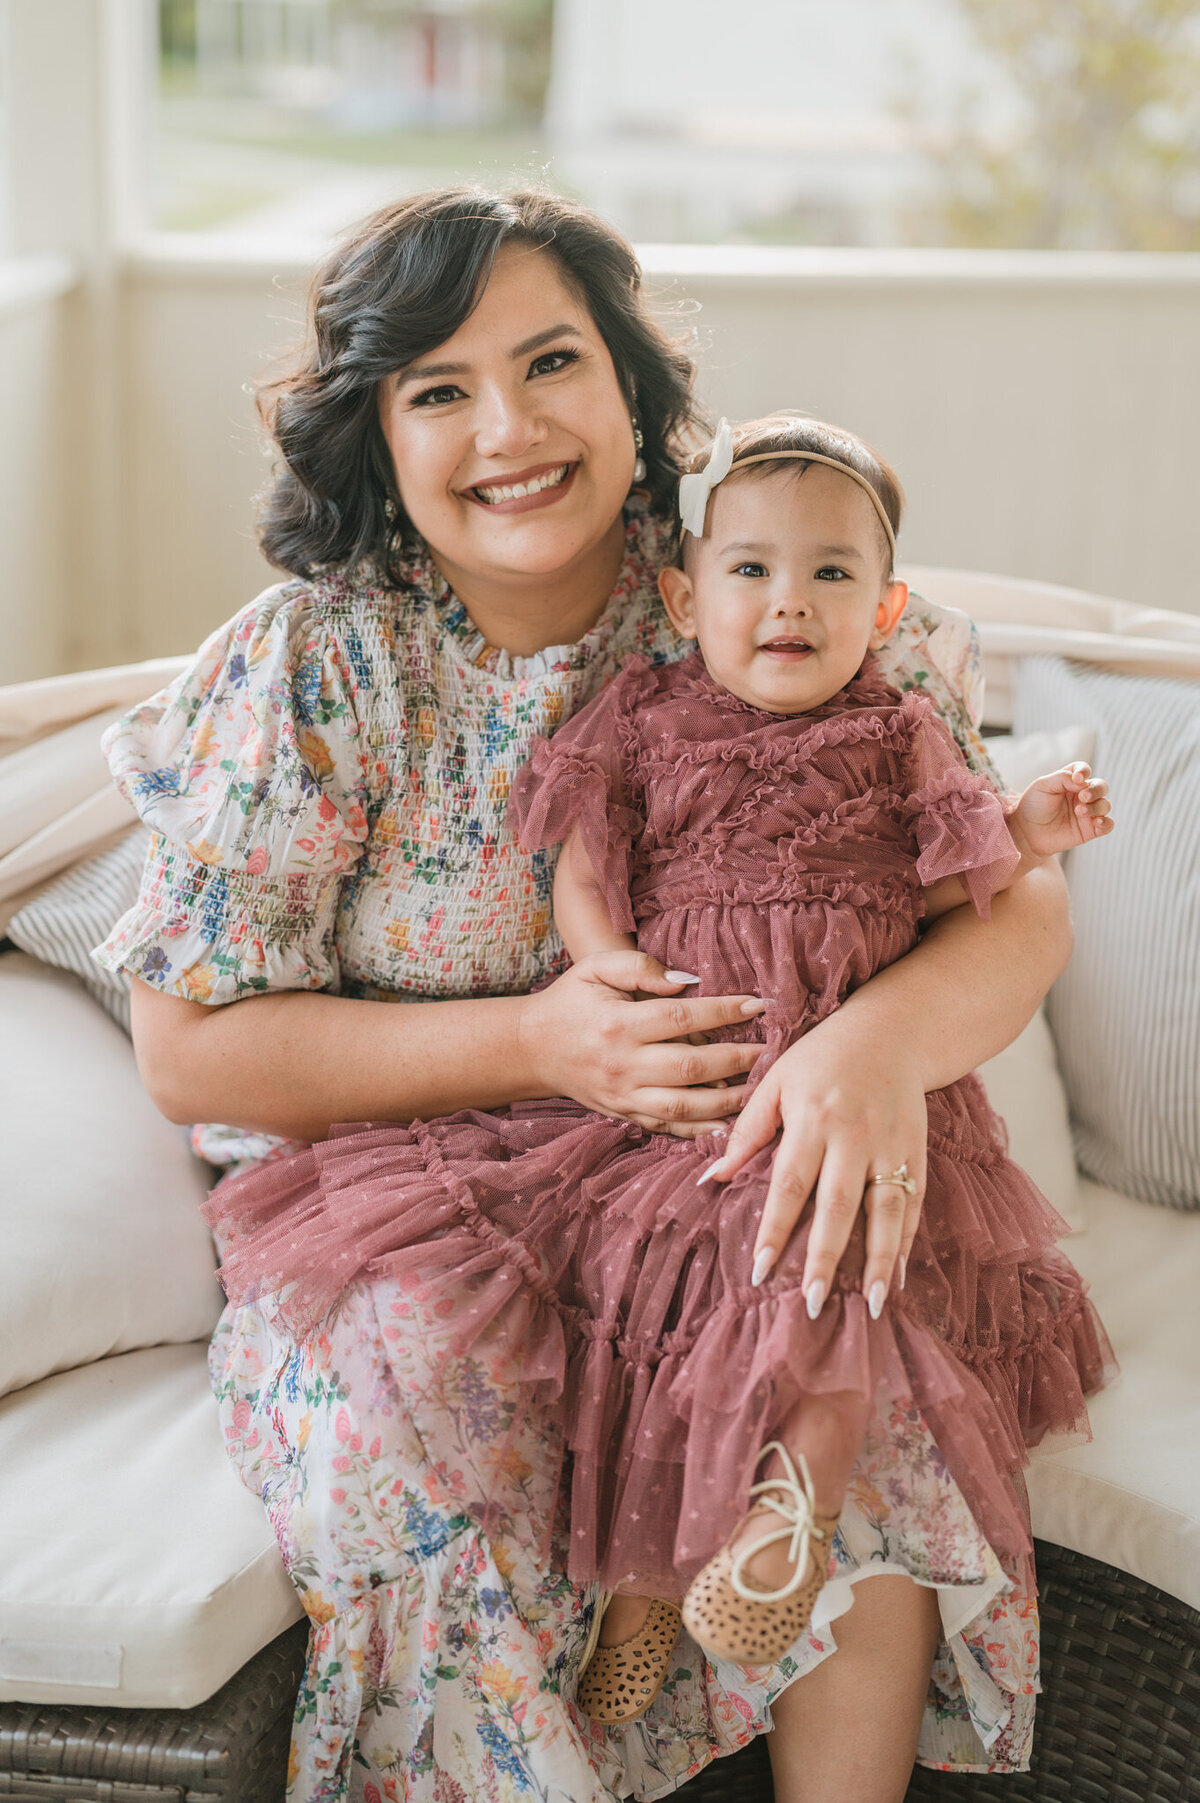 Beautiful picture of a mom and little girl in dresses during a San Antonio family photo session.